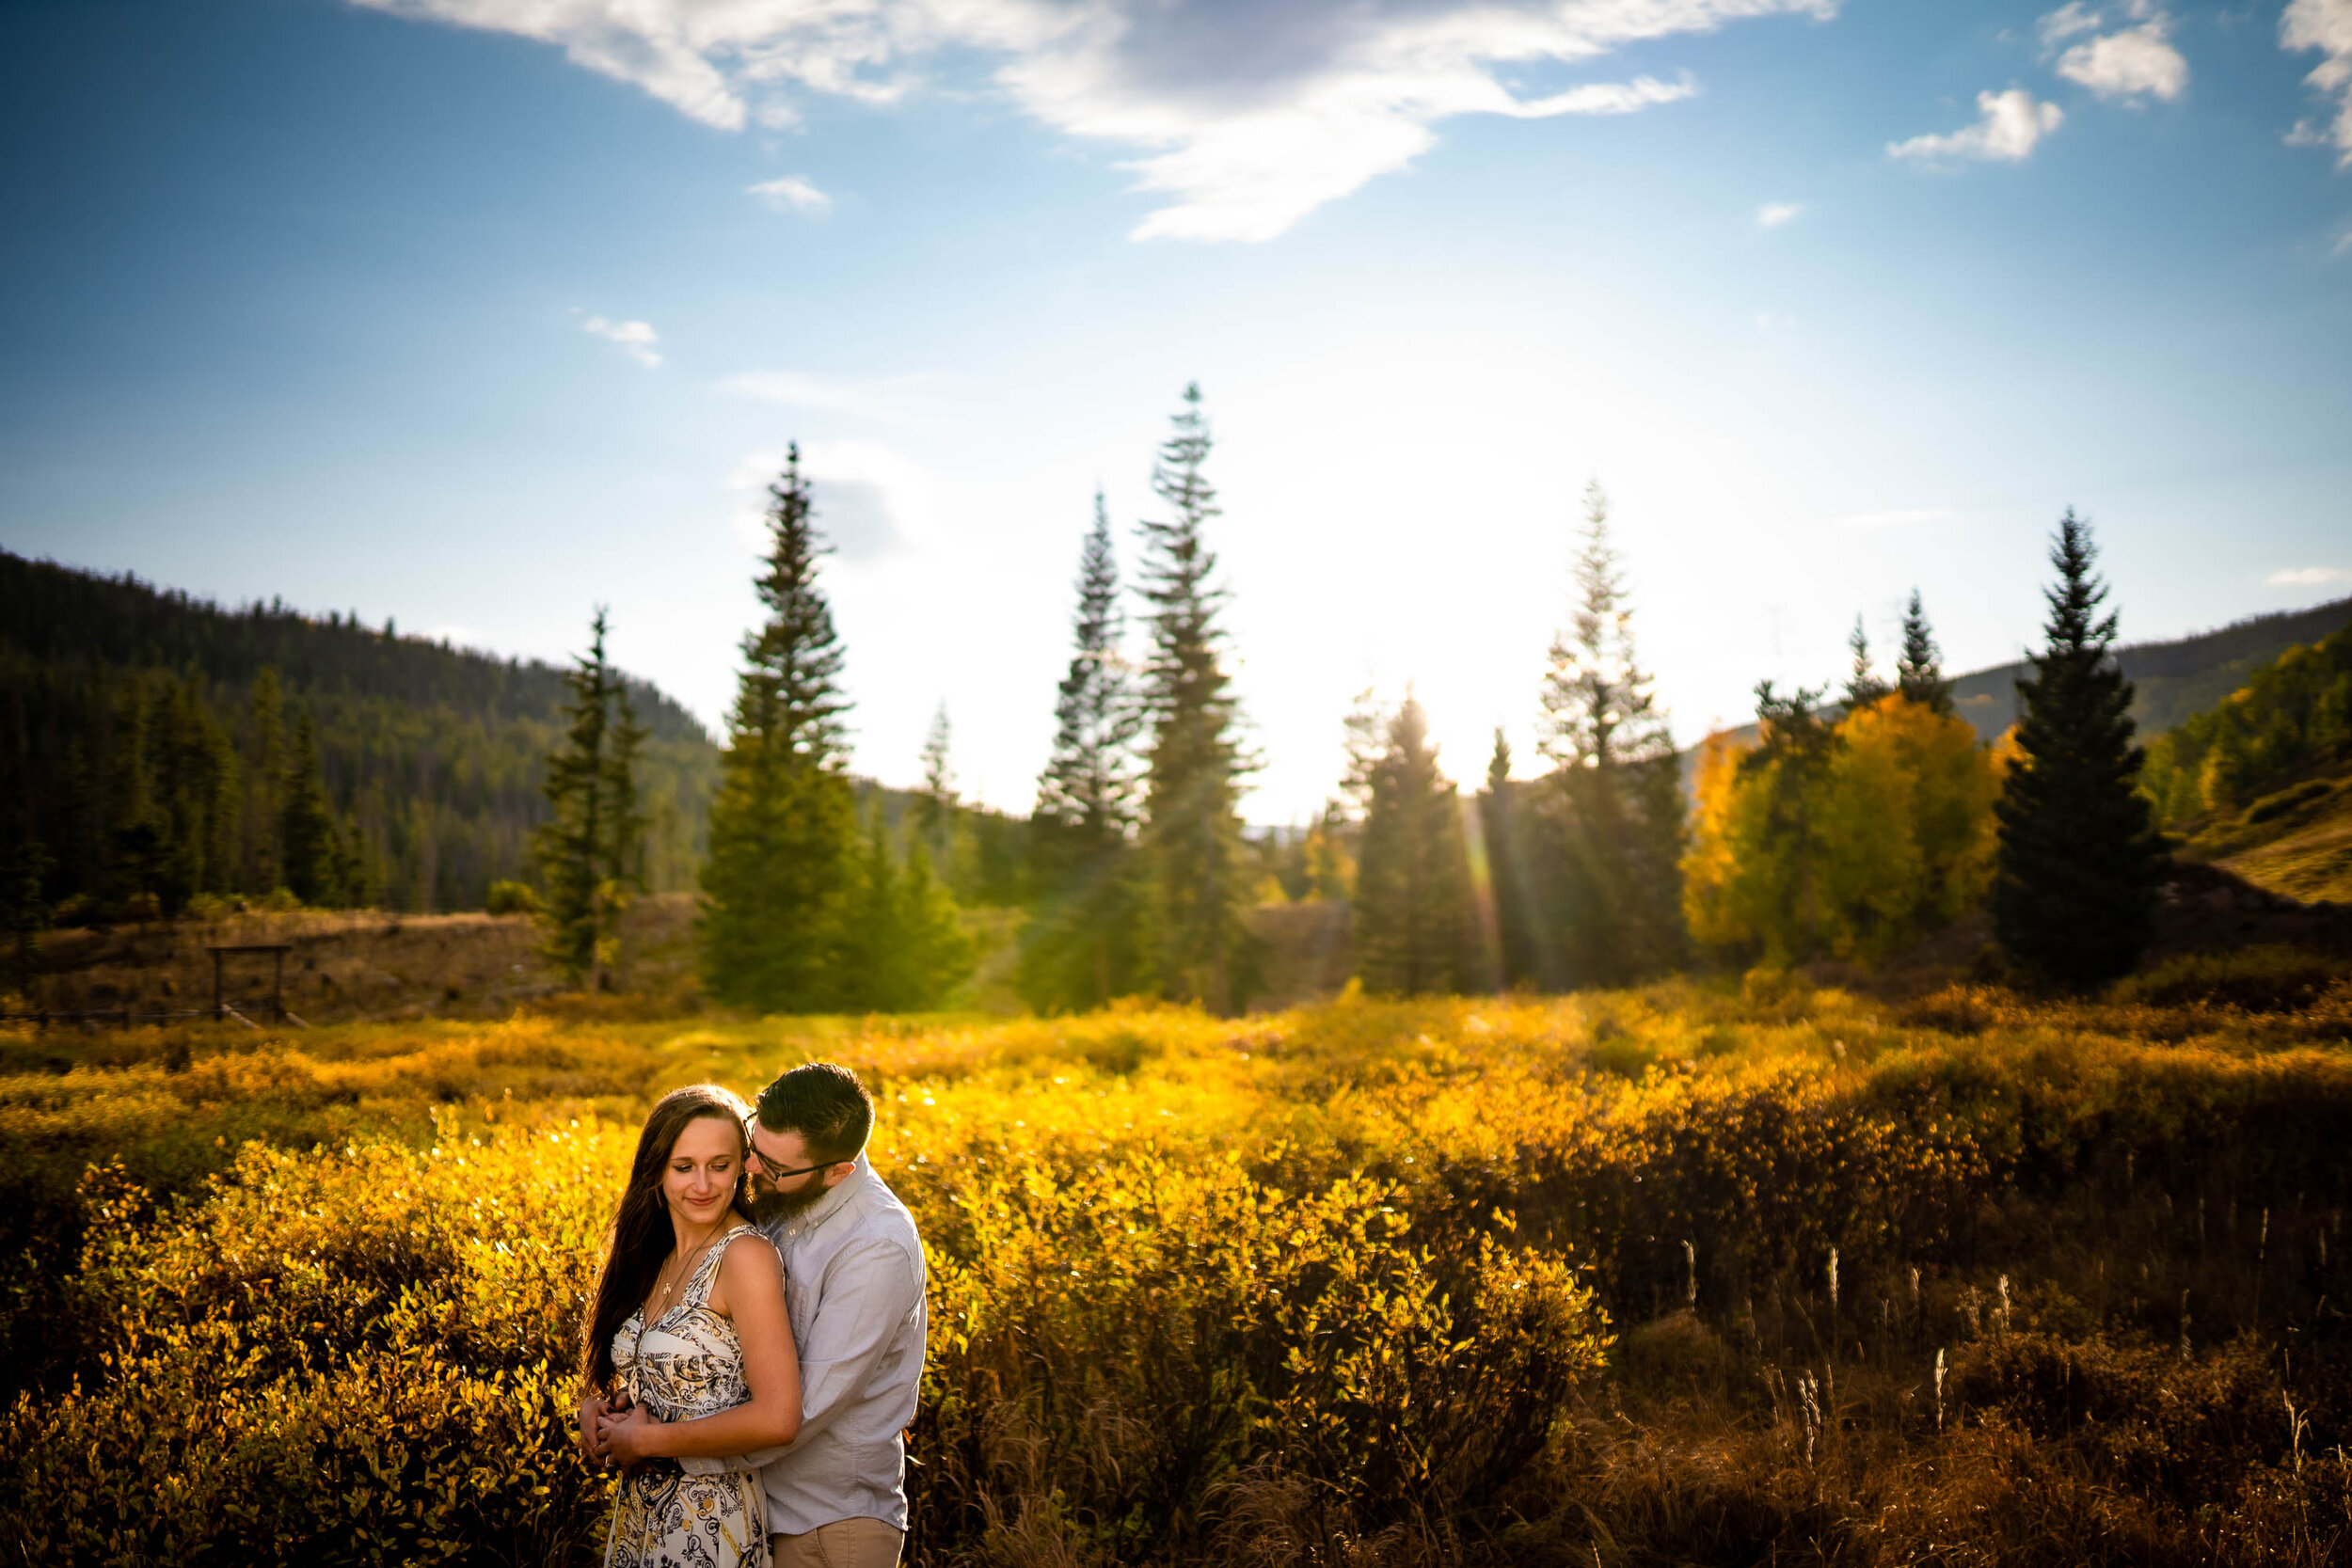 Engaged couple embraces for a portrait in a field of gold during golden hour in the peak of the fall season with foliage all around, Engagement Session, Engagement Photos, Engagement Photos Inspiration, Engagement Photography, Engagement Photographer, Fall Engagement Photos, Mountain Engagement Photos, Piney River Ranch engagement photos, Vail engagement session, Vail engagement photos, Vail engagement photography, Vail engagement photographer, Vail engagement inspiration, Colorado engagement session, Colorado engagement photos, Colorado engagement photography, Colorado engagement photographer, Colorado engagement inspiration